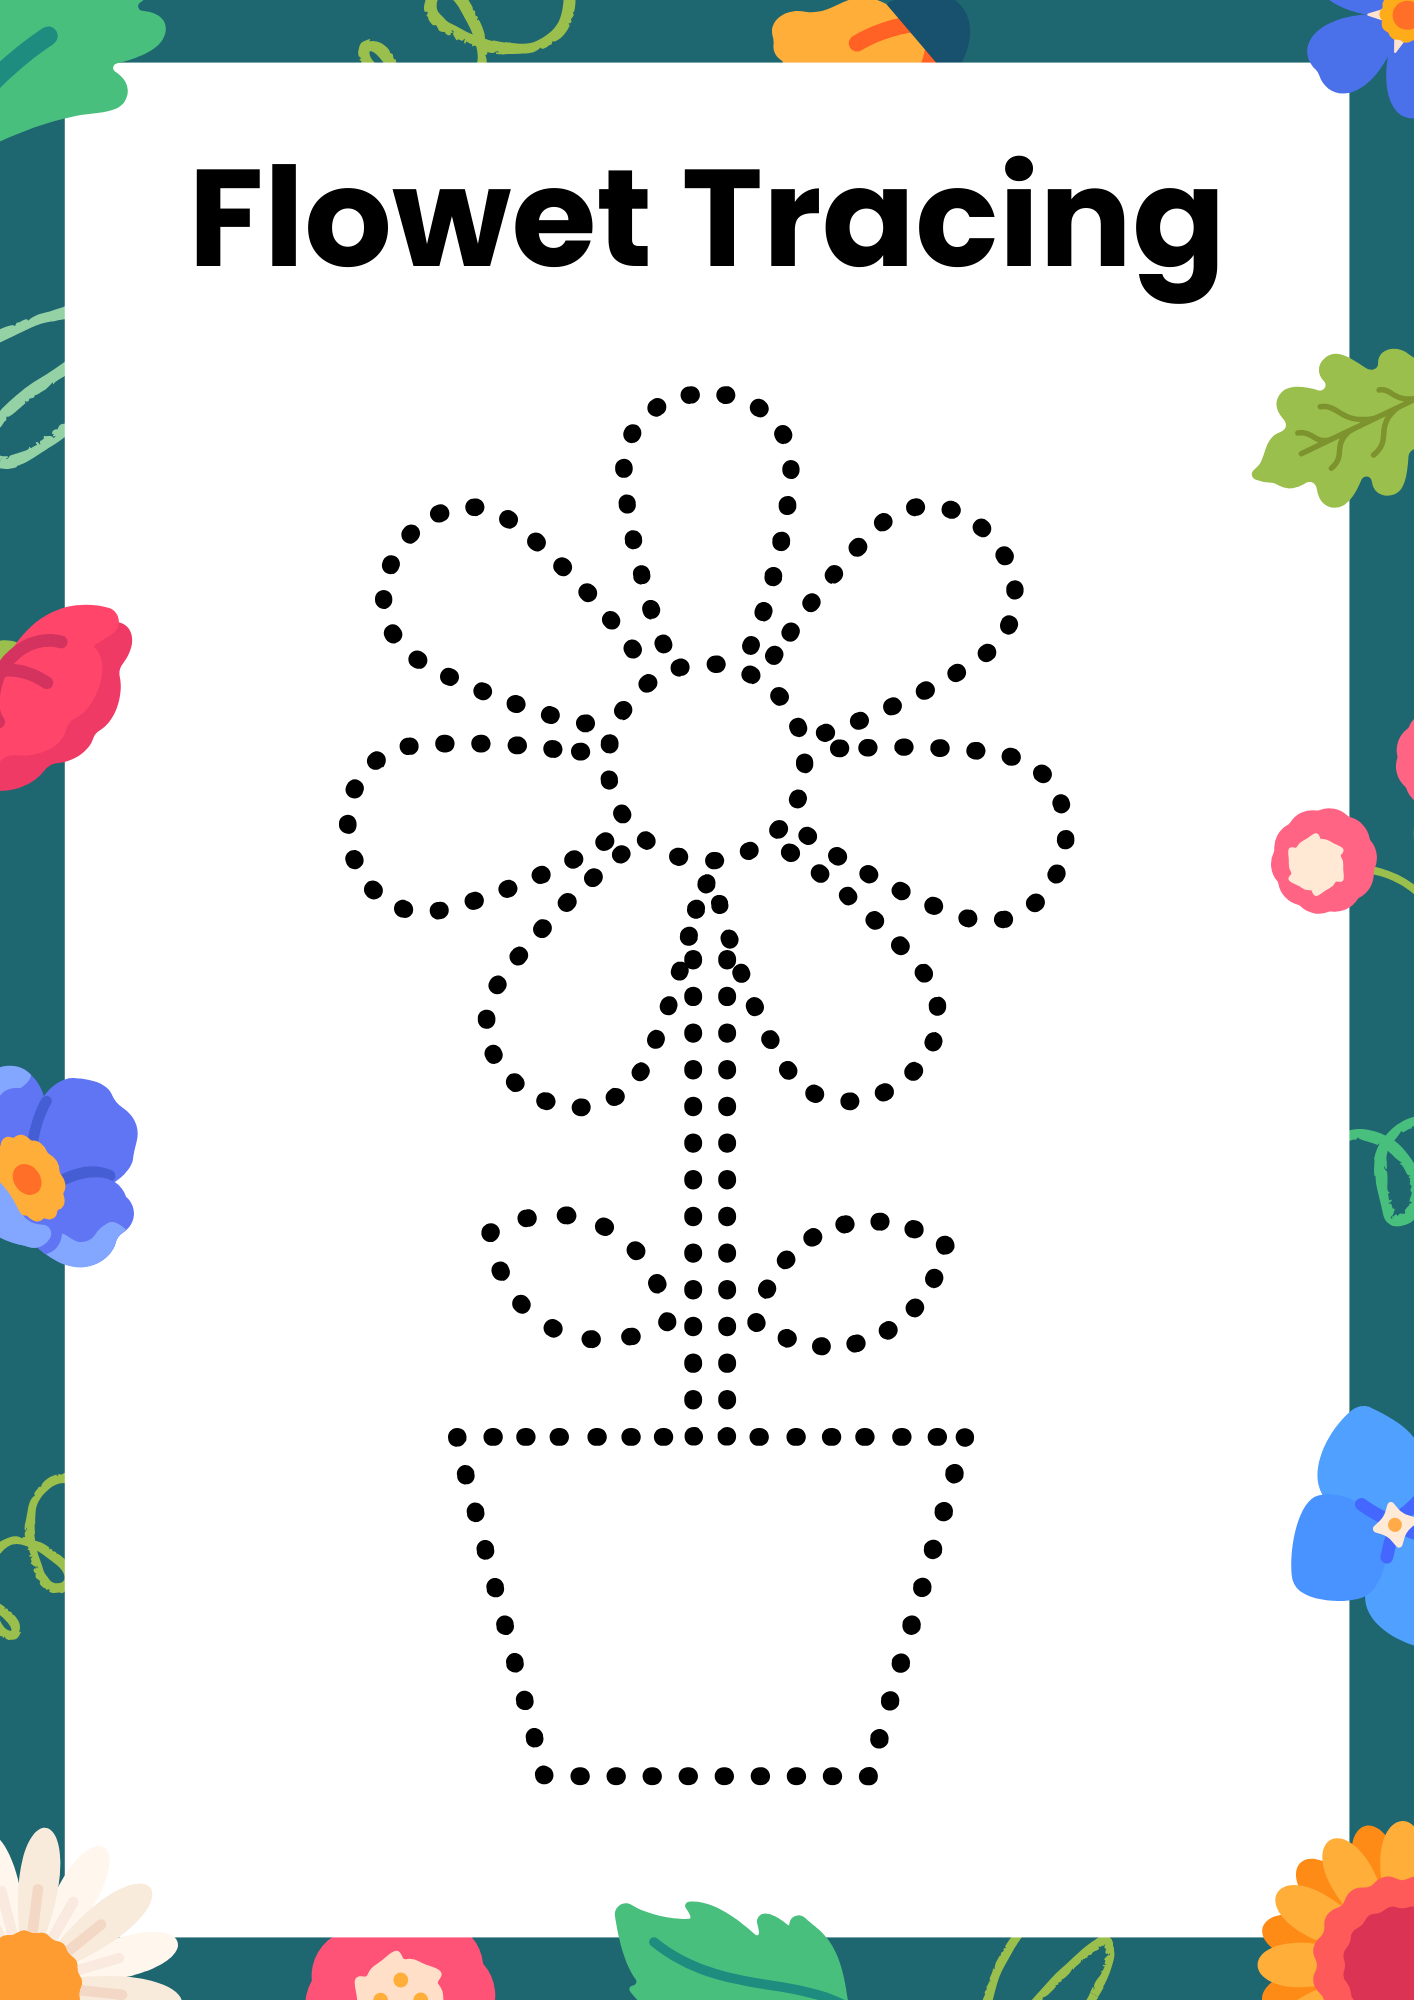 Flower tracing for kids